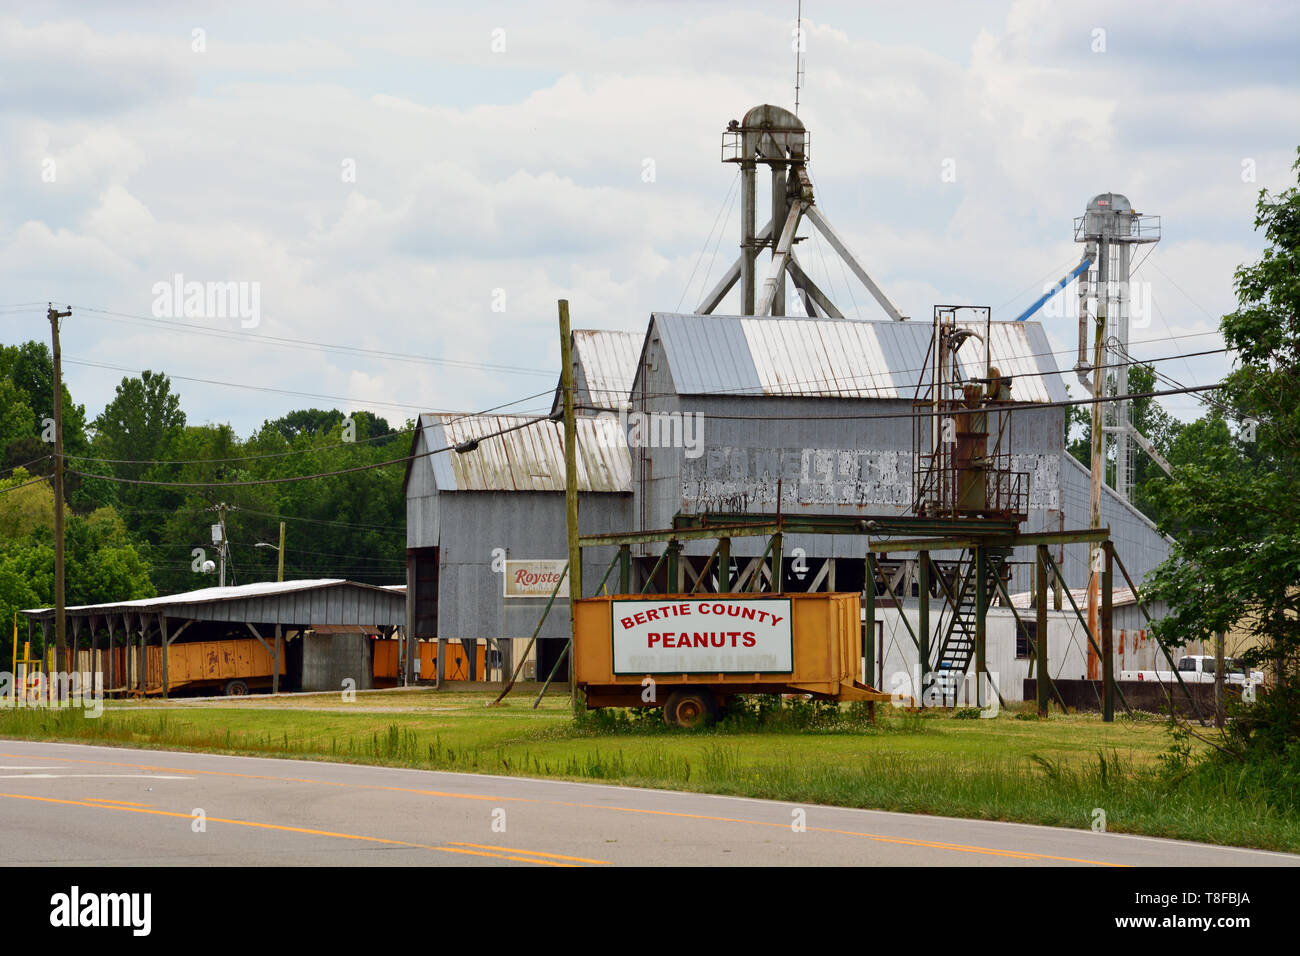 Bertie County Peanuts in Winsor NC processes nuts from local peanut fields and is well known for their Blister Fried Peanuts. Stock Photo